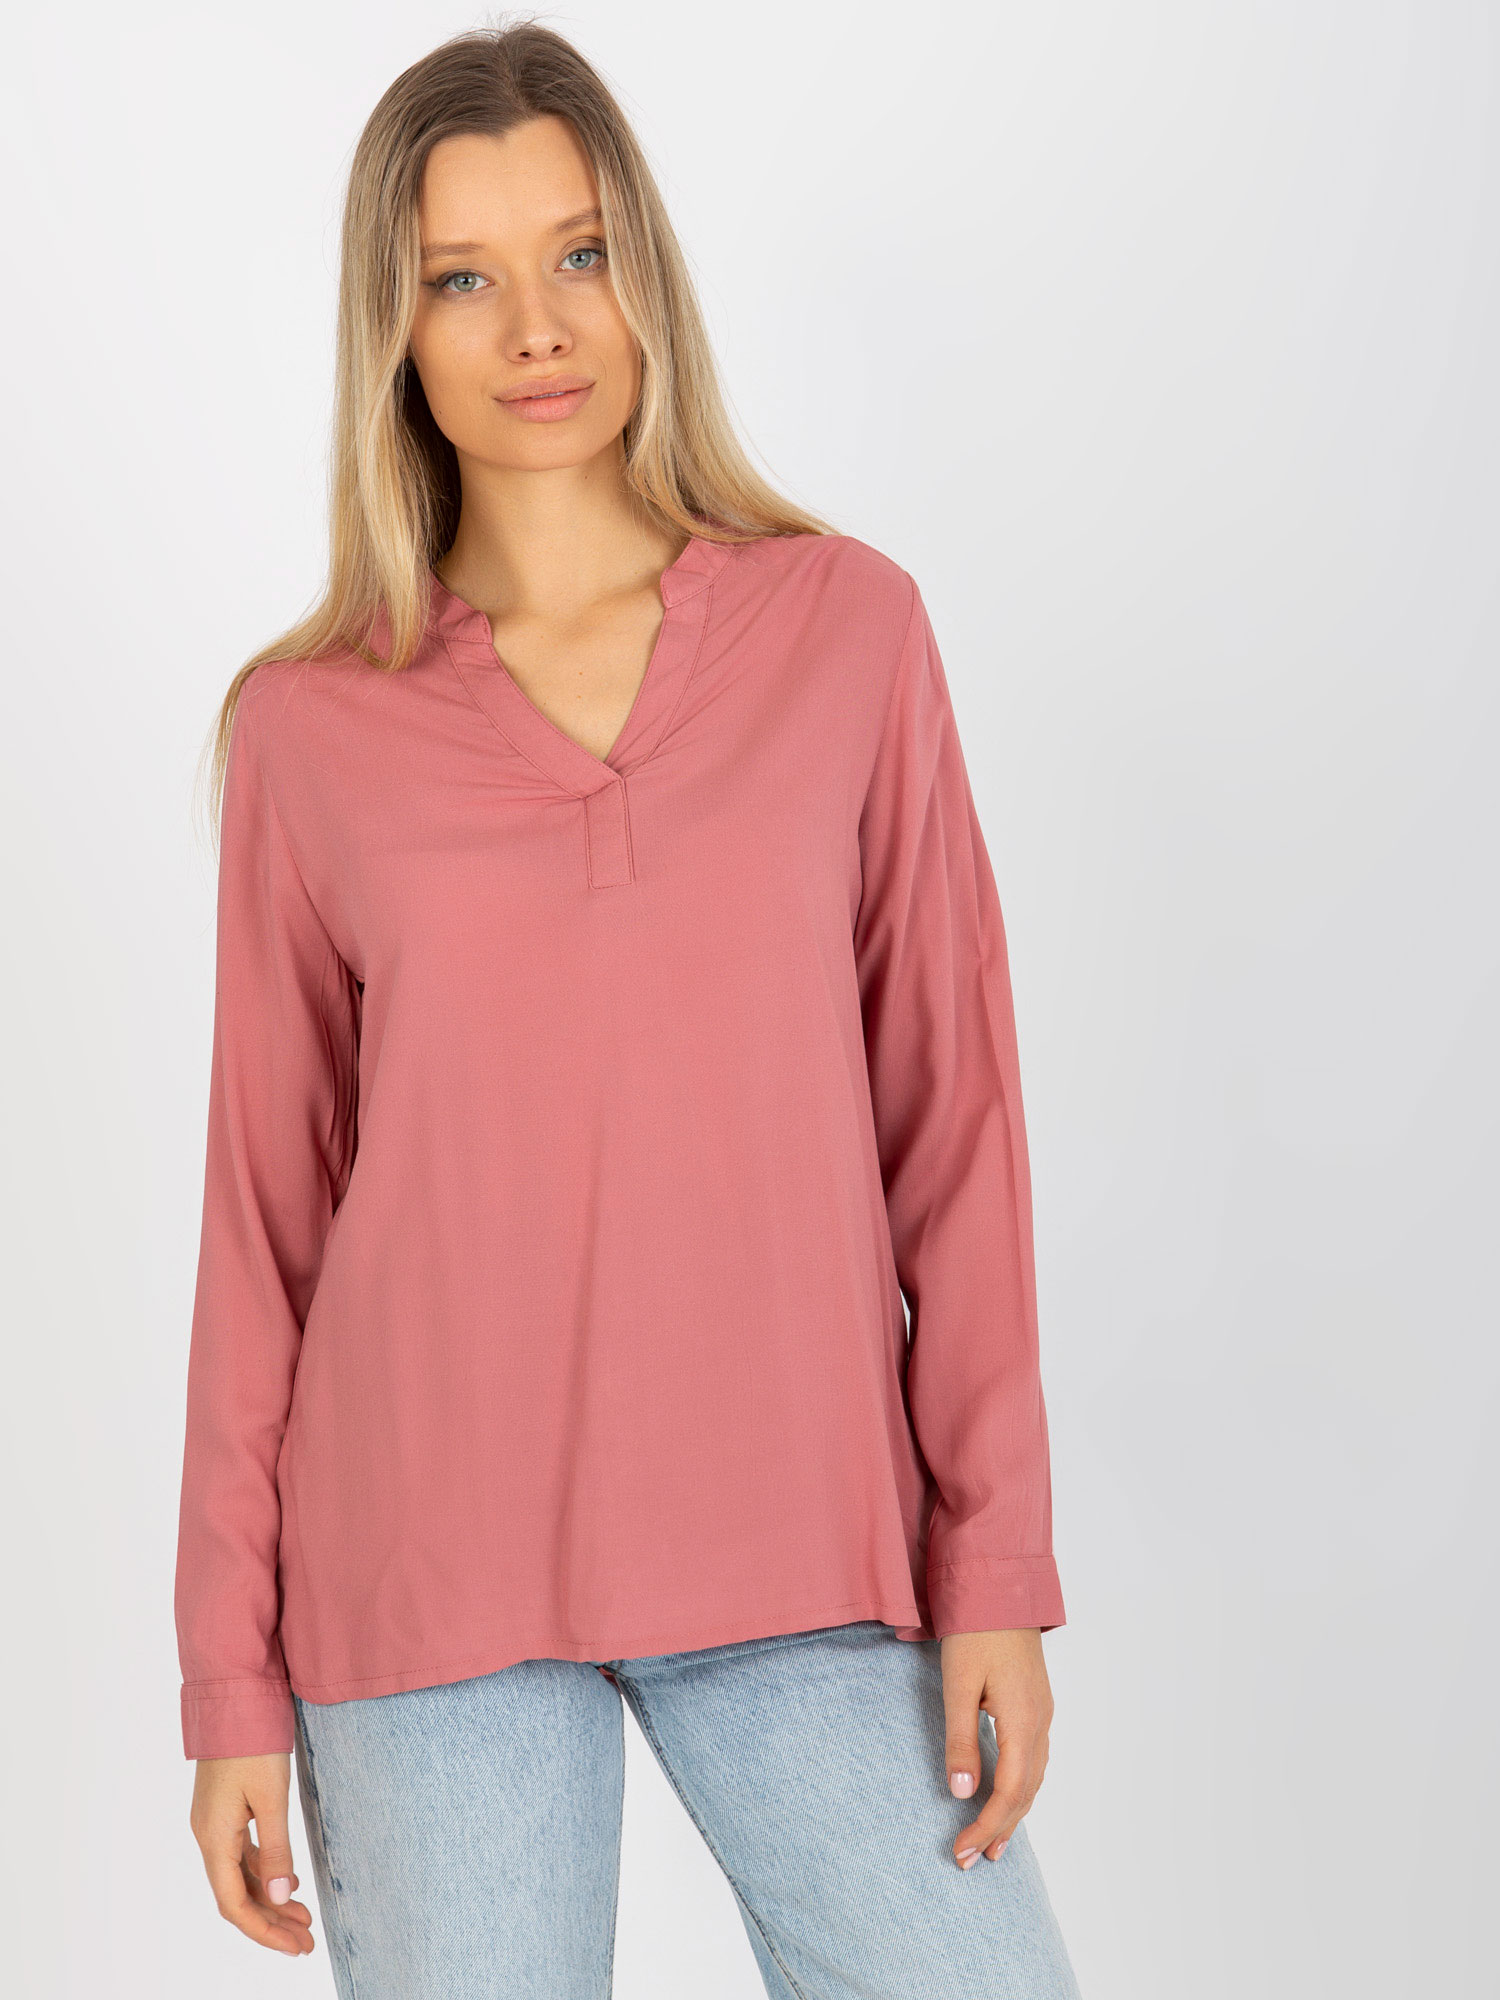 Dusty pink plain blouse with SUBLEVEL neckline